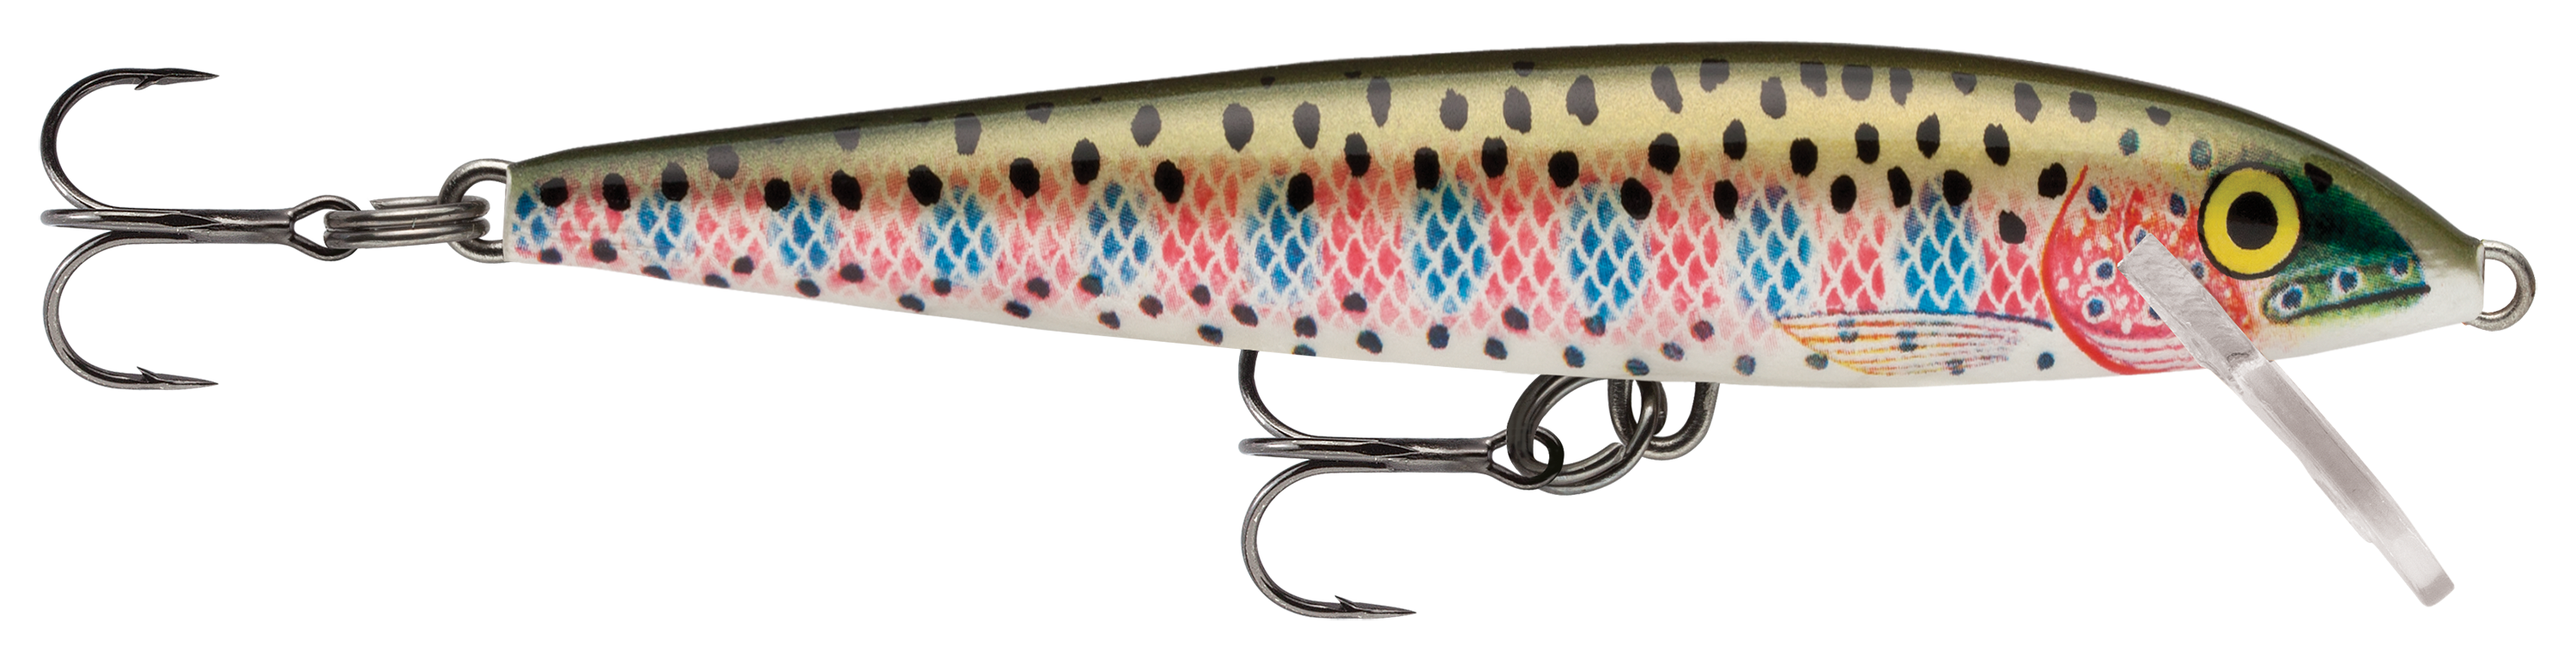 Rapala Original Floating 05 Lure - 2 Inches Brown Trout